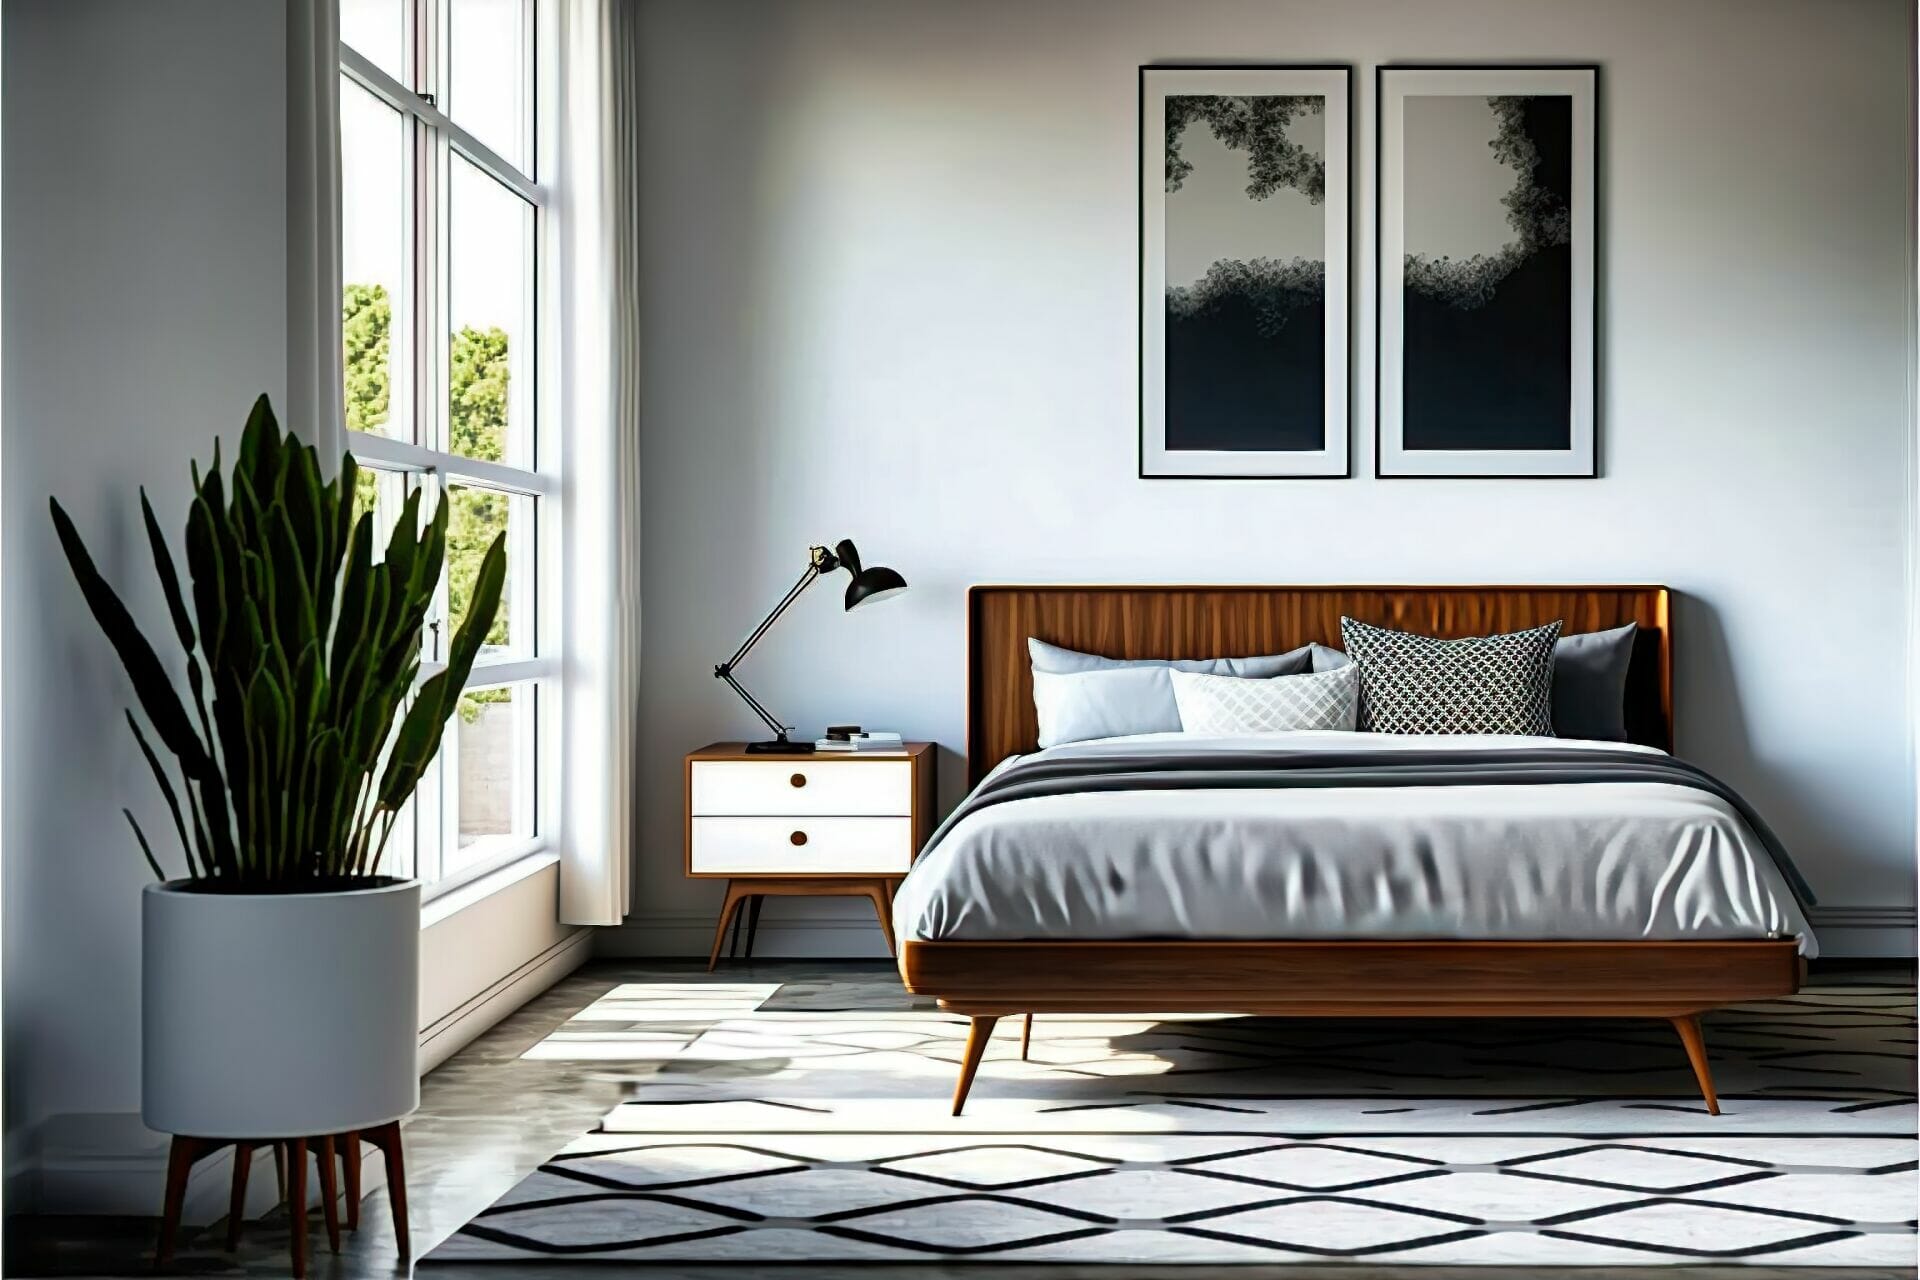 Mid-Century Modern Bedroom – A Sleek And Chic Modern Bedroom Featuring A Low-Profile Platform Bed With A Crisp White Headboard, A Simple Wooden Dresser, And A Geometric Patterned Area Rug.